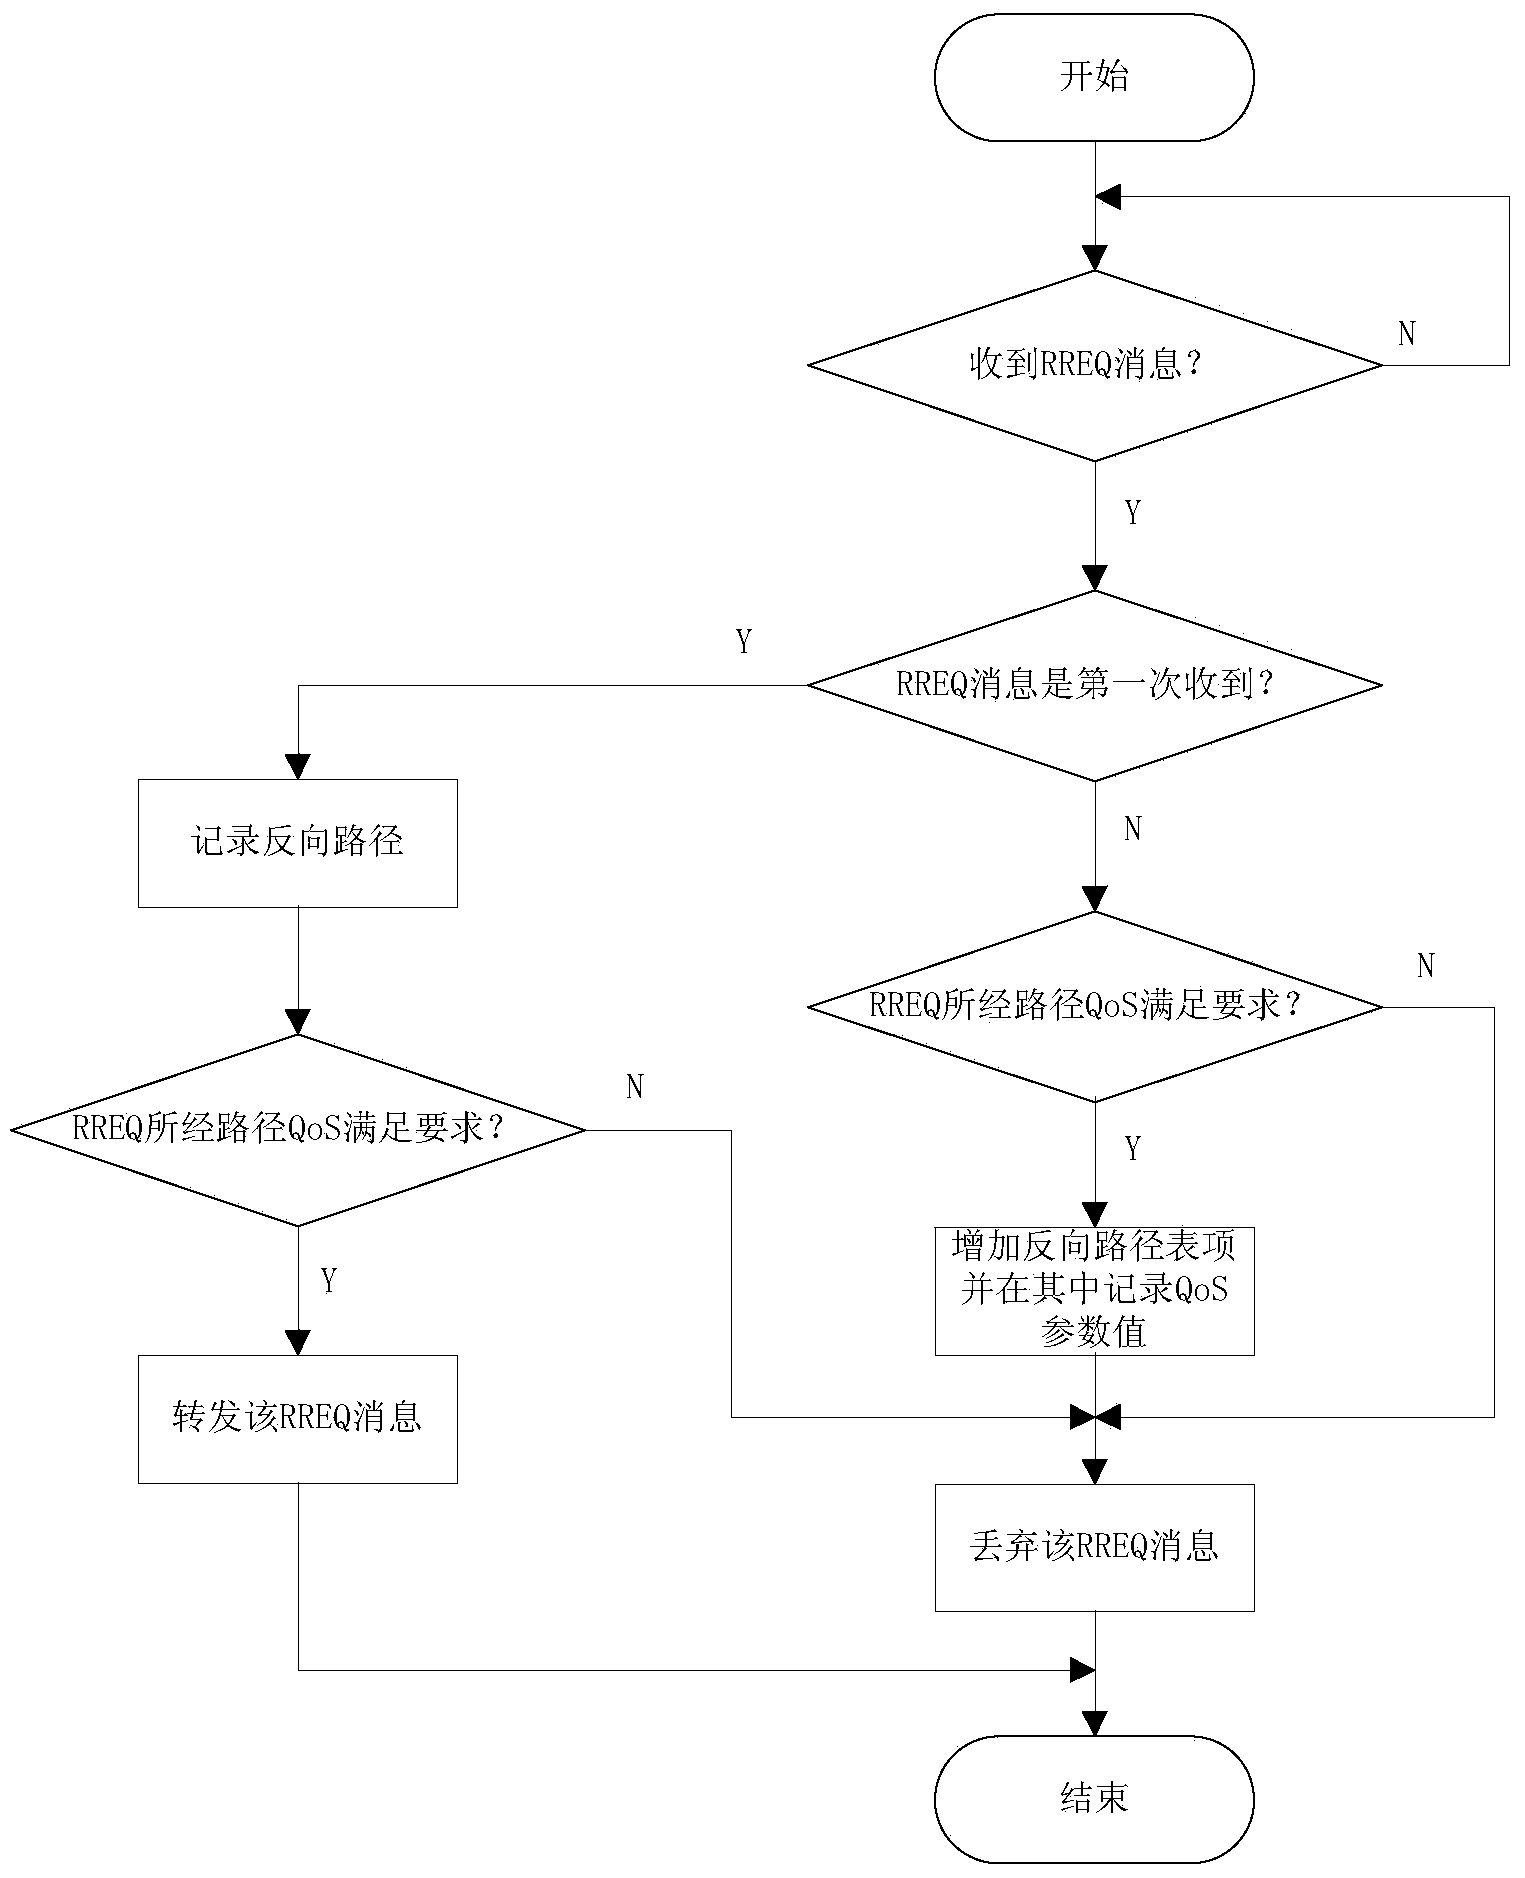 Method for generating multiple paths with multiple QoS constraints in wireless multi-hop network